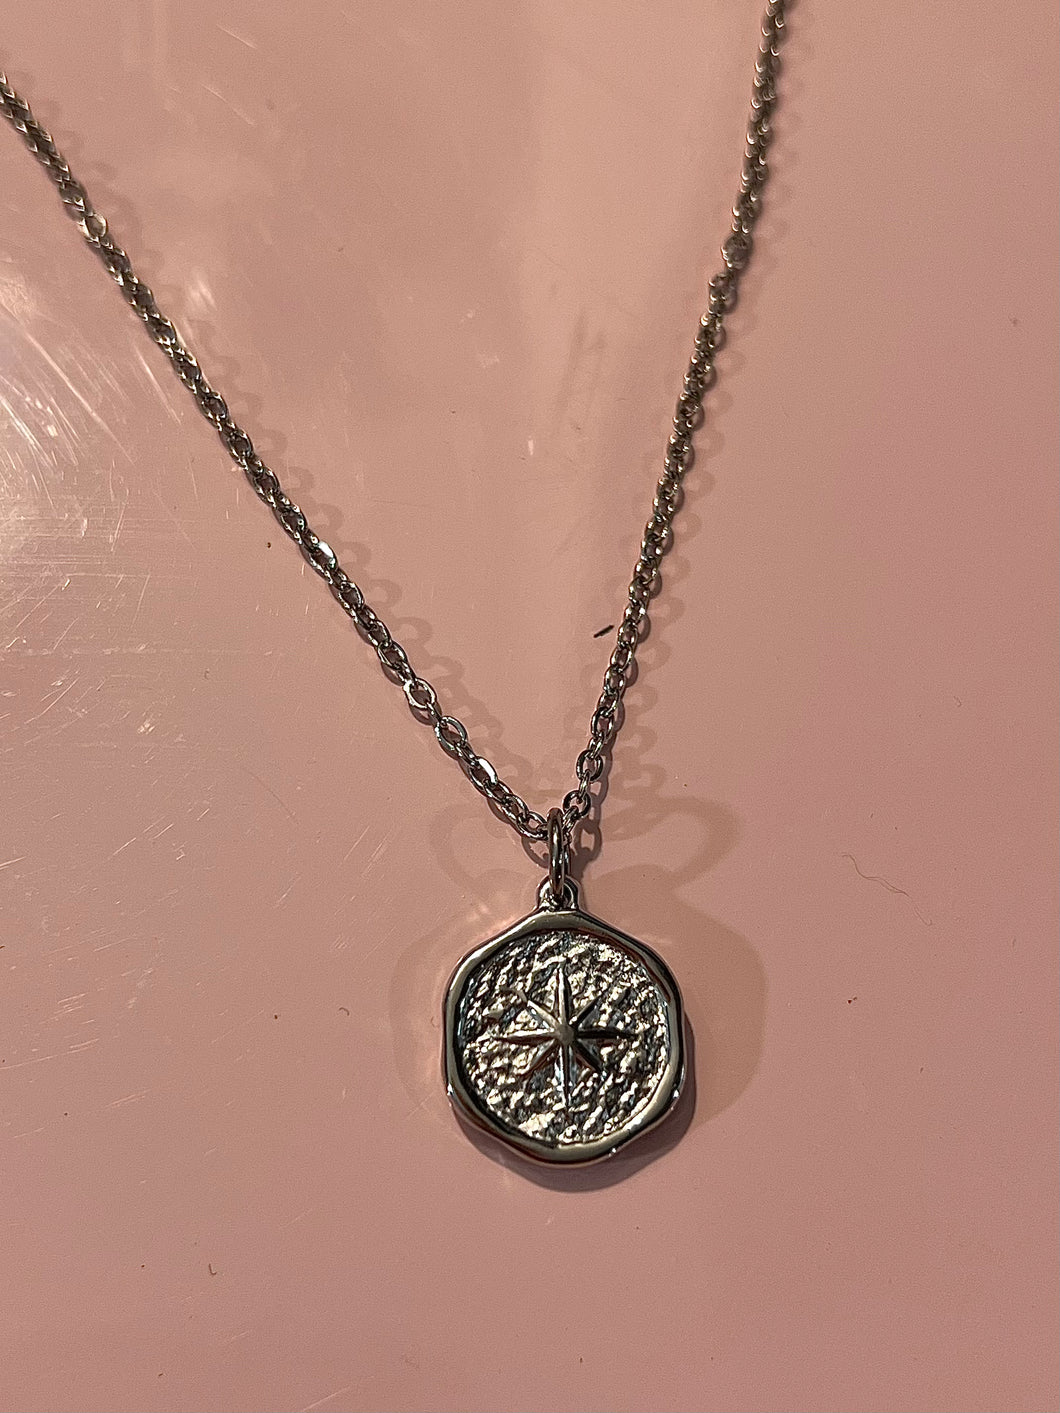 Star compass necklace